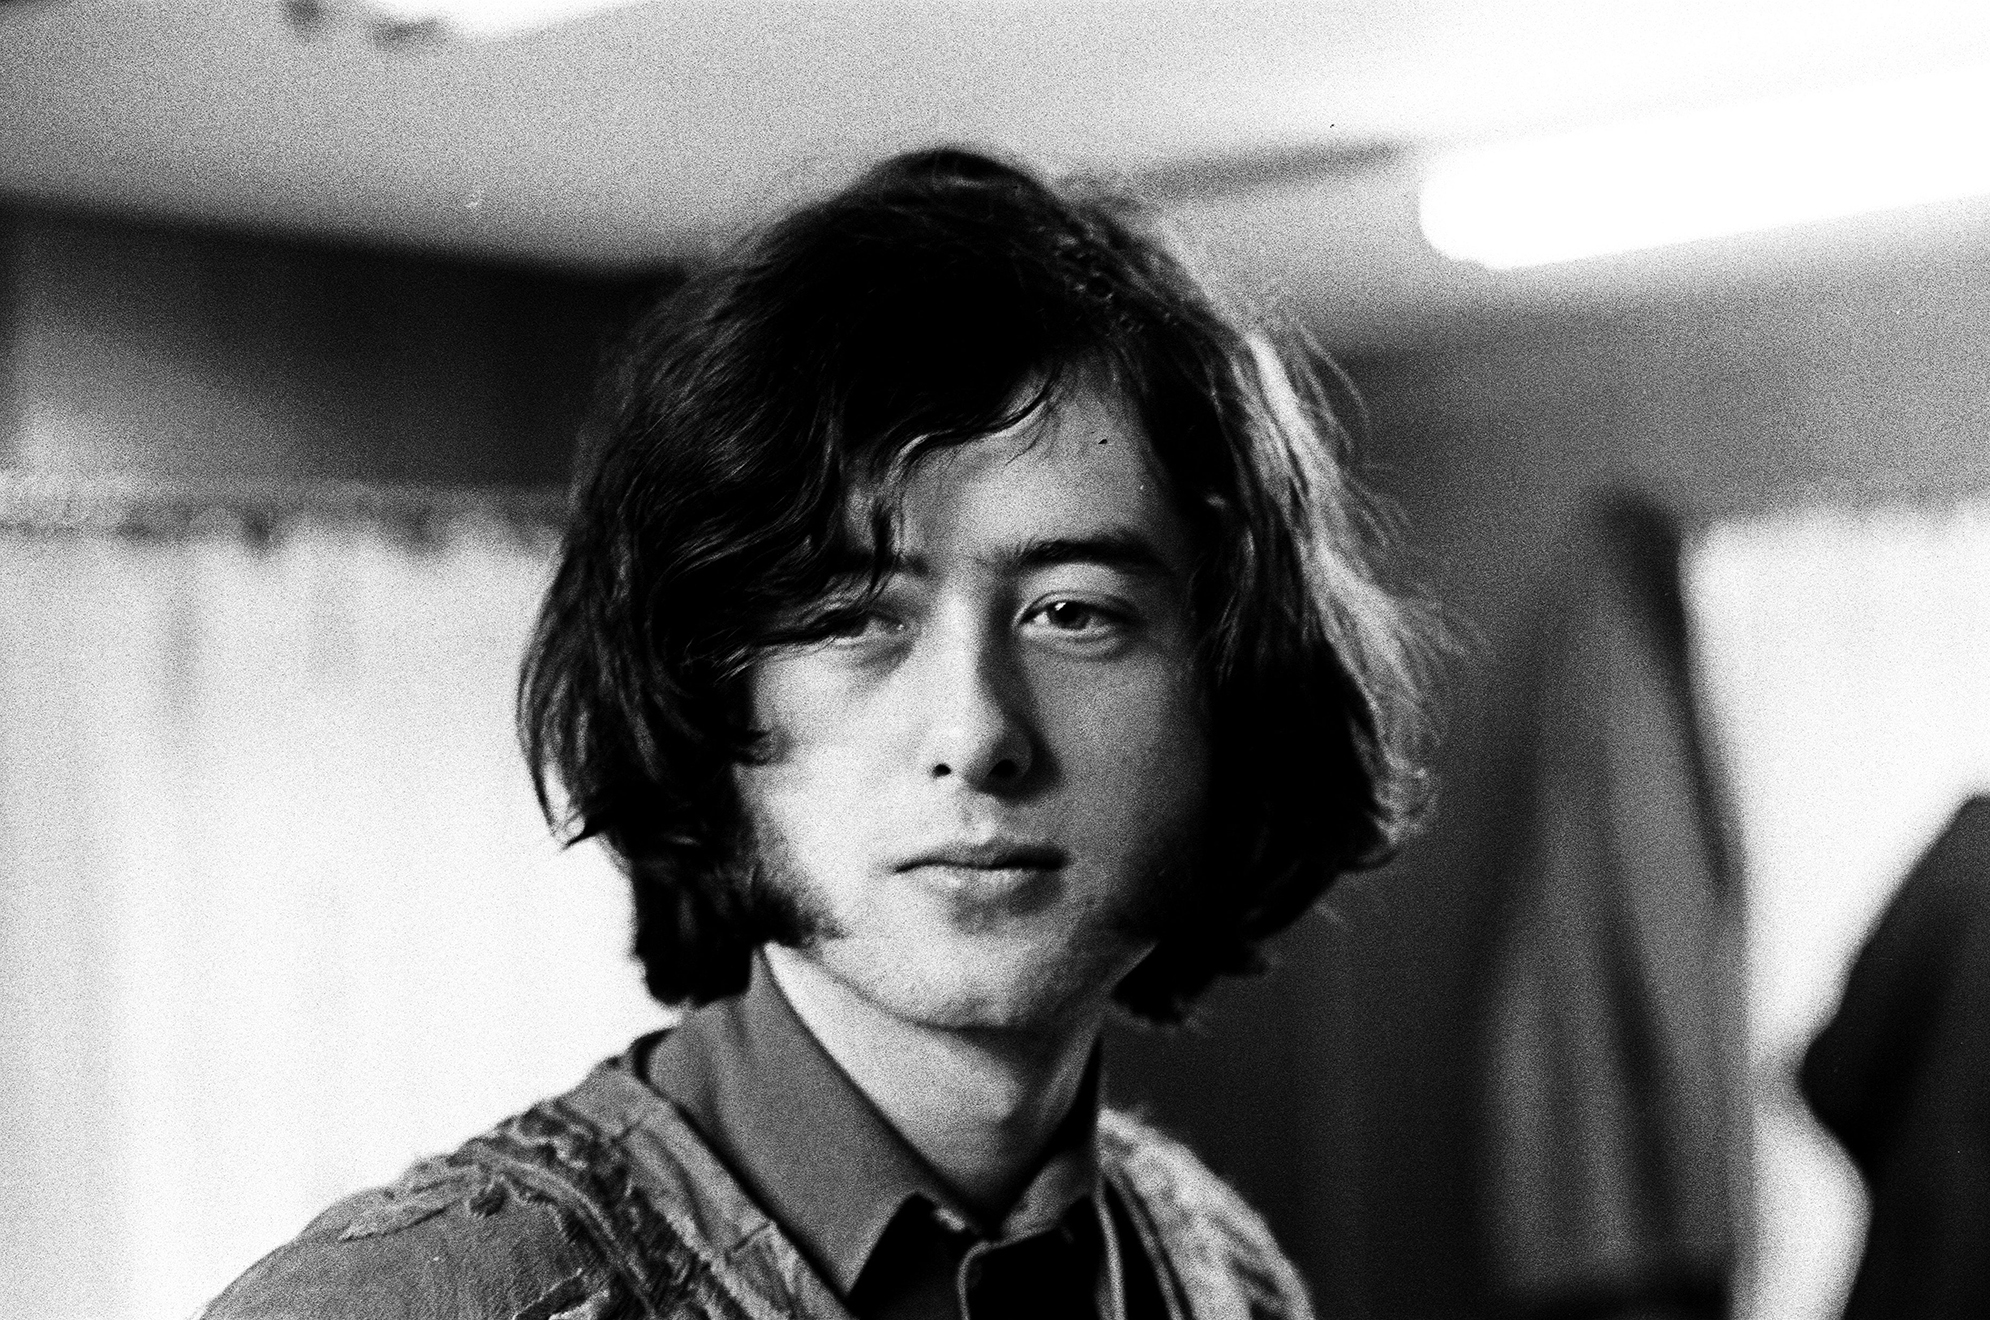 Jimmy Page andrà in tour nel 2016